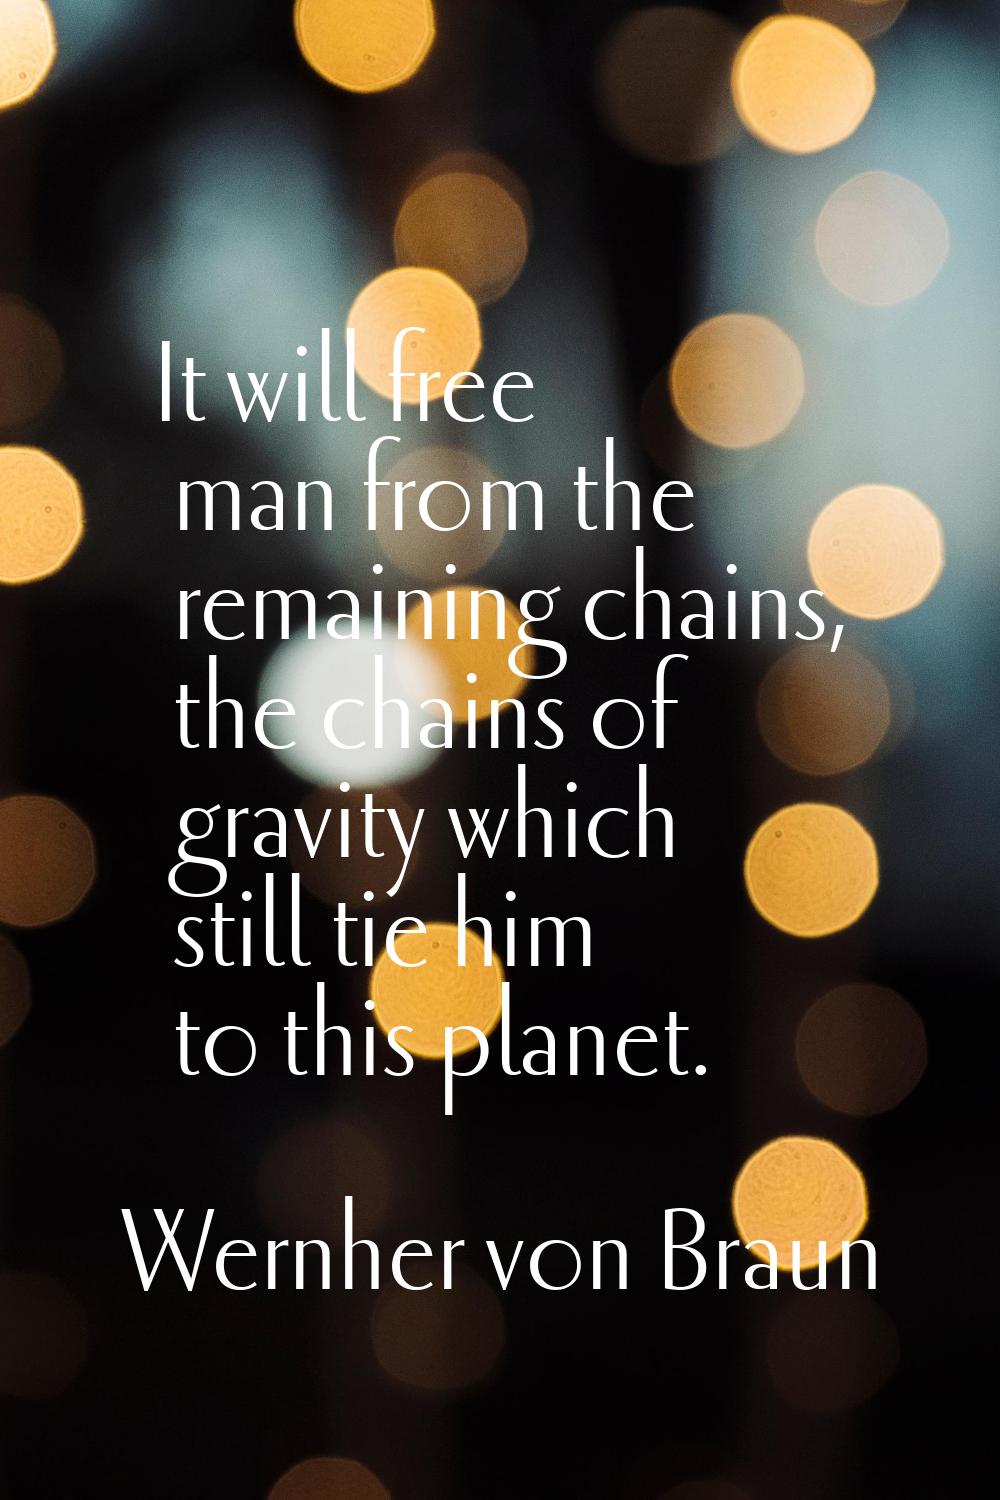 It will free man from the remaining chains, the chains of gravity which still tie him to this plane